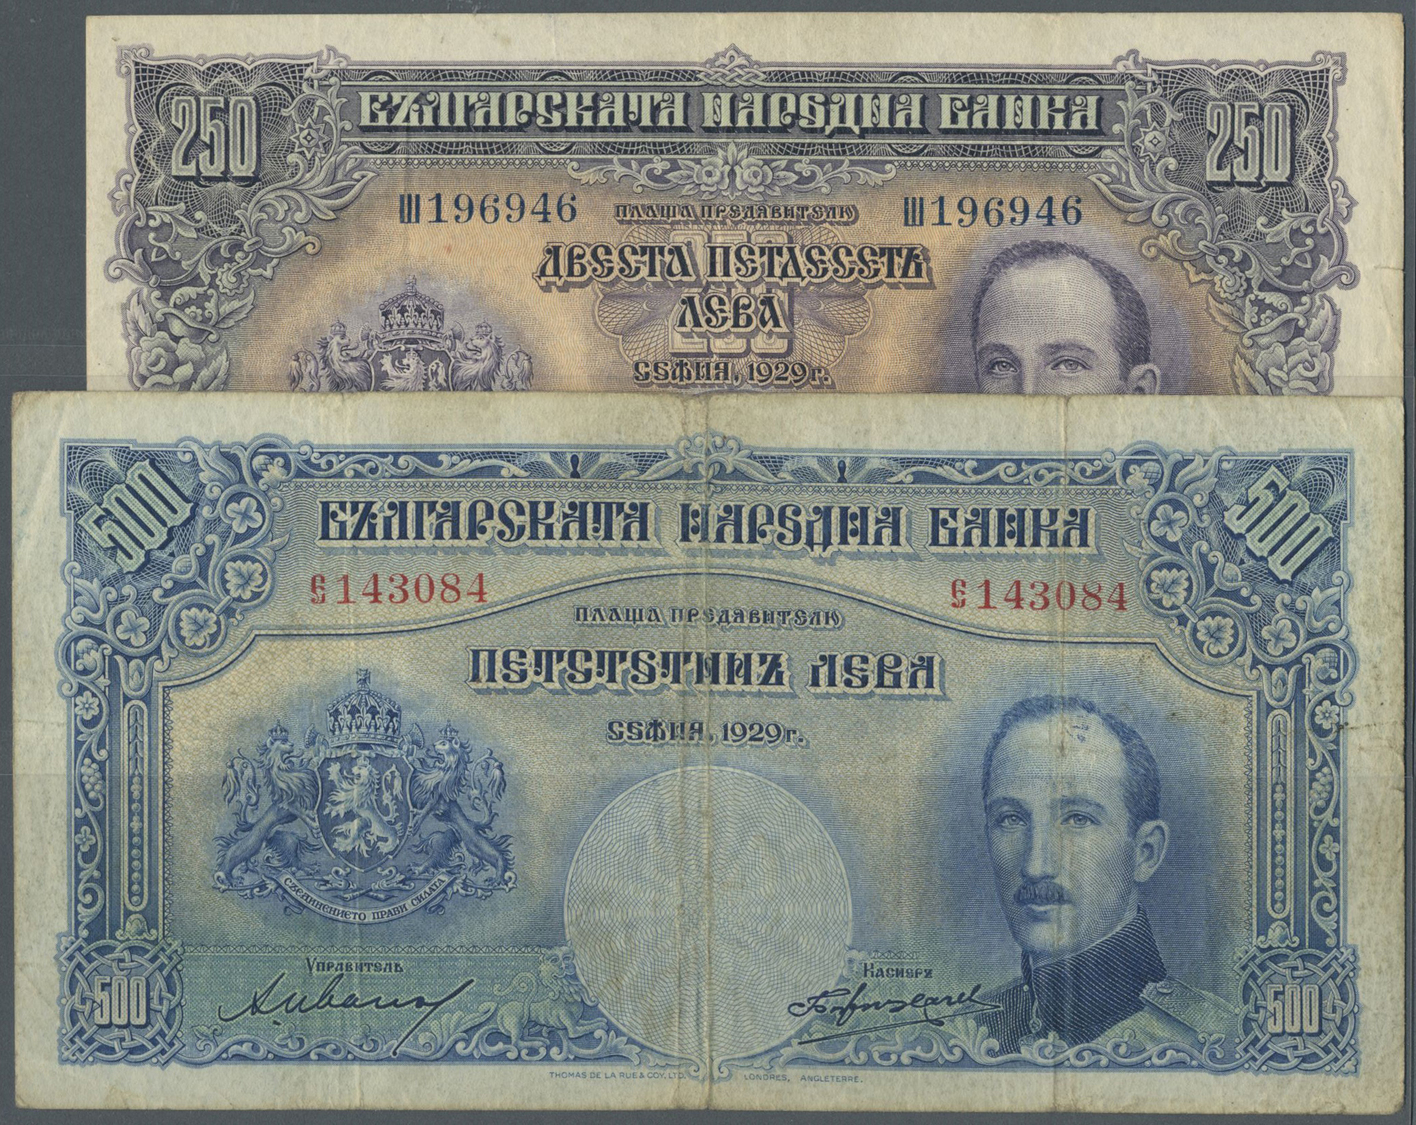 00405 Bulgaria / Bulgarien: Set Of 2 Notes Containgin 250 And 500 Leva 1929 P. 51 & 52, The First One In Condition F+, T - Bulgaria